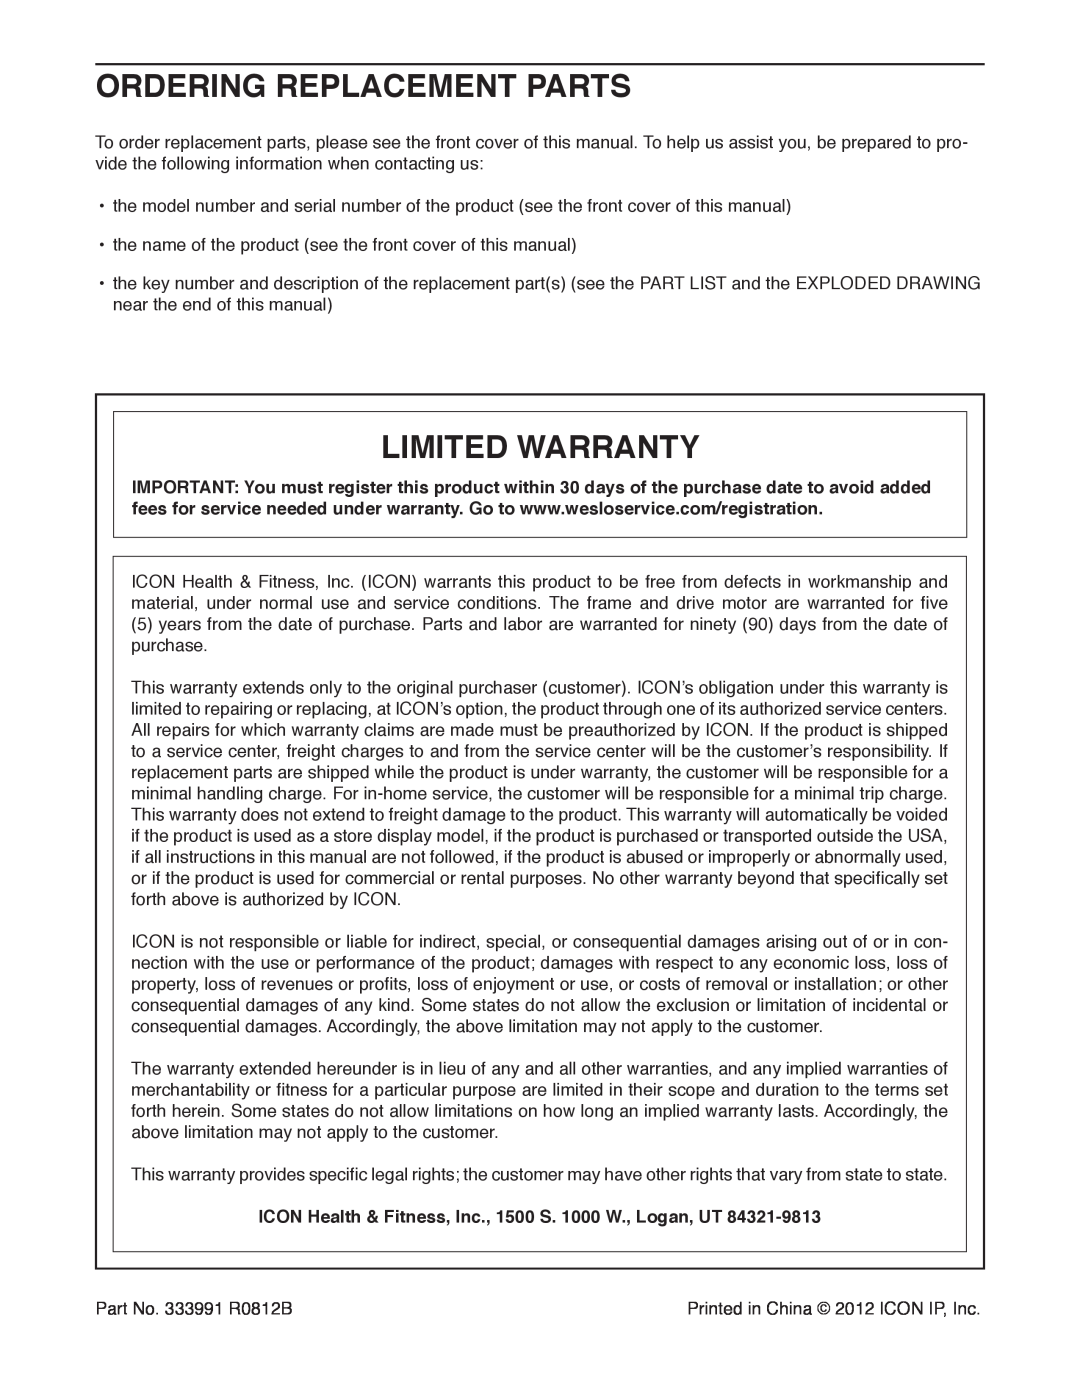 Weslo WLTL39312.0 Ordering Replacement Parts, Limited Warranty, ICON Health & Fitness, Inc., 1500 S. 1000 W., Logan, UT 